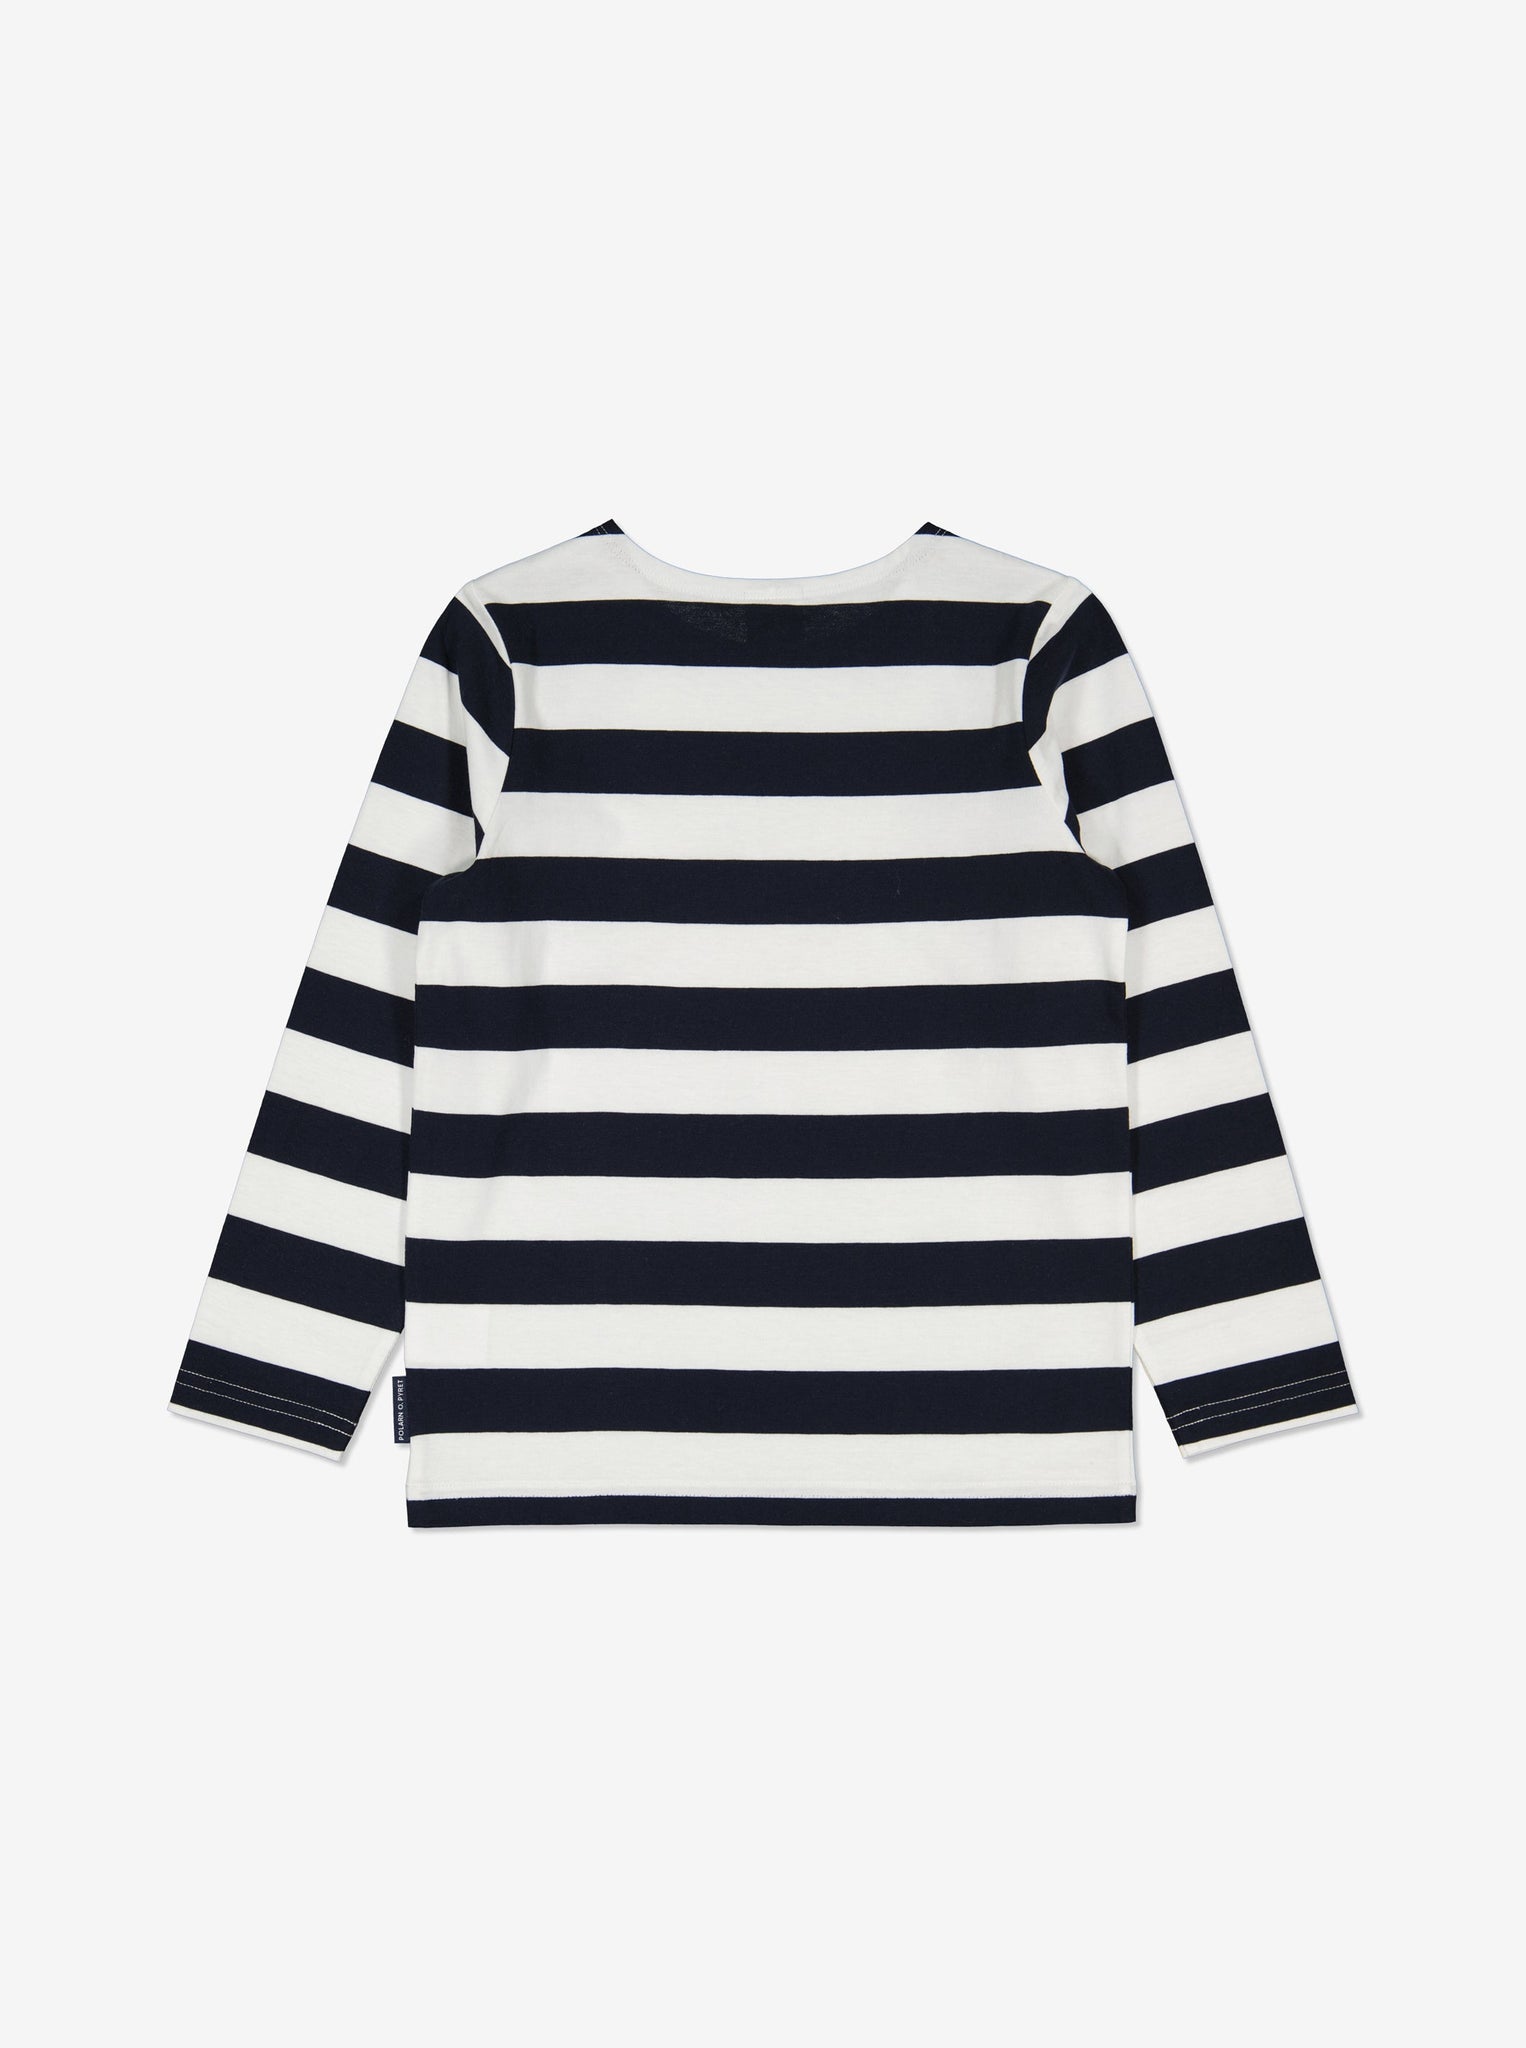 Striped Navy Unisex Kids Top from Polarn O. Pyret Kidswear. Made from 100% GOTS Organic Cotton.